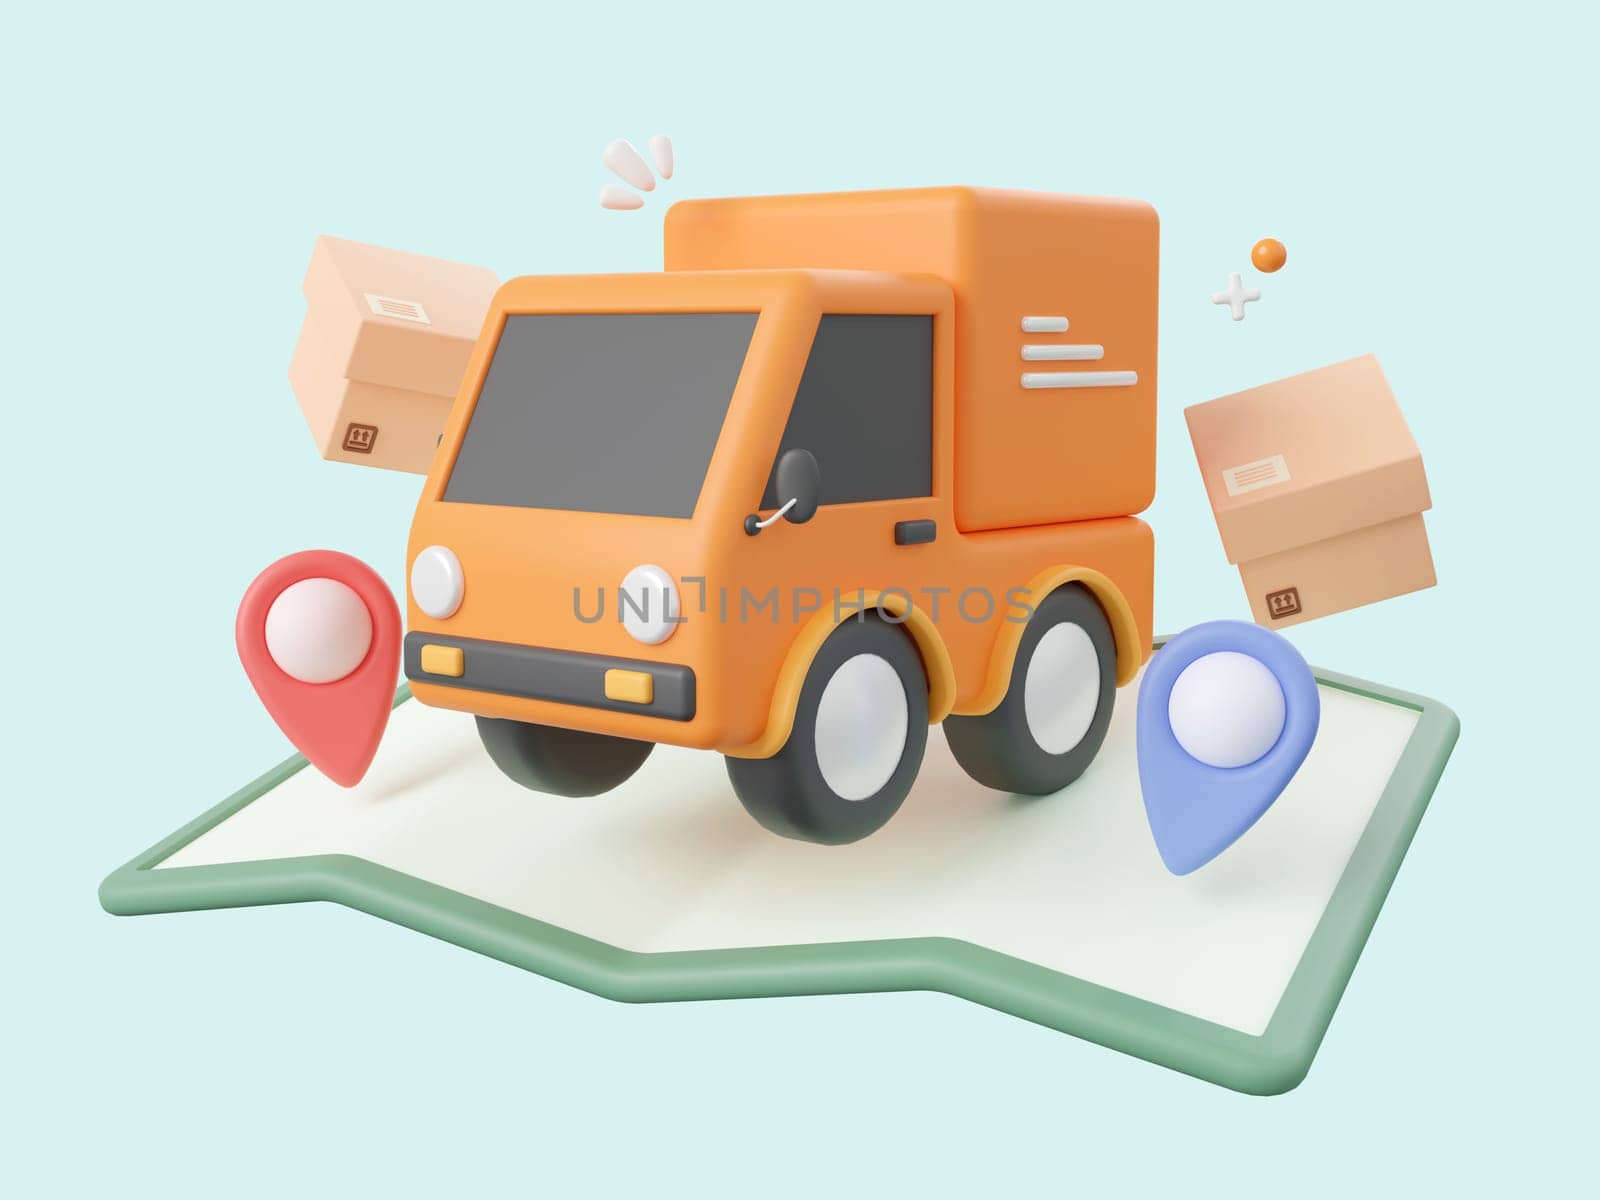 3d cartoon design illustration of Delivery service, Delivery truck shipping parcel box with pins on map.